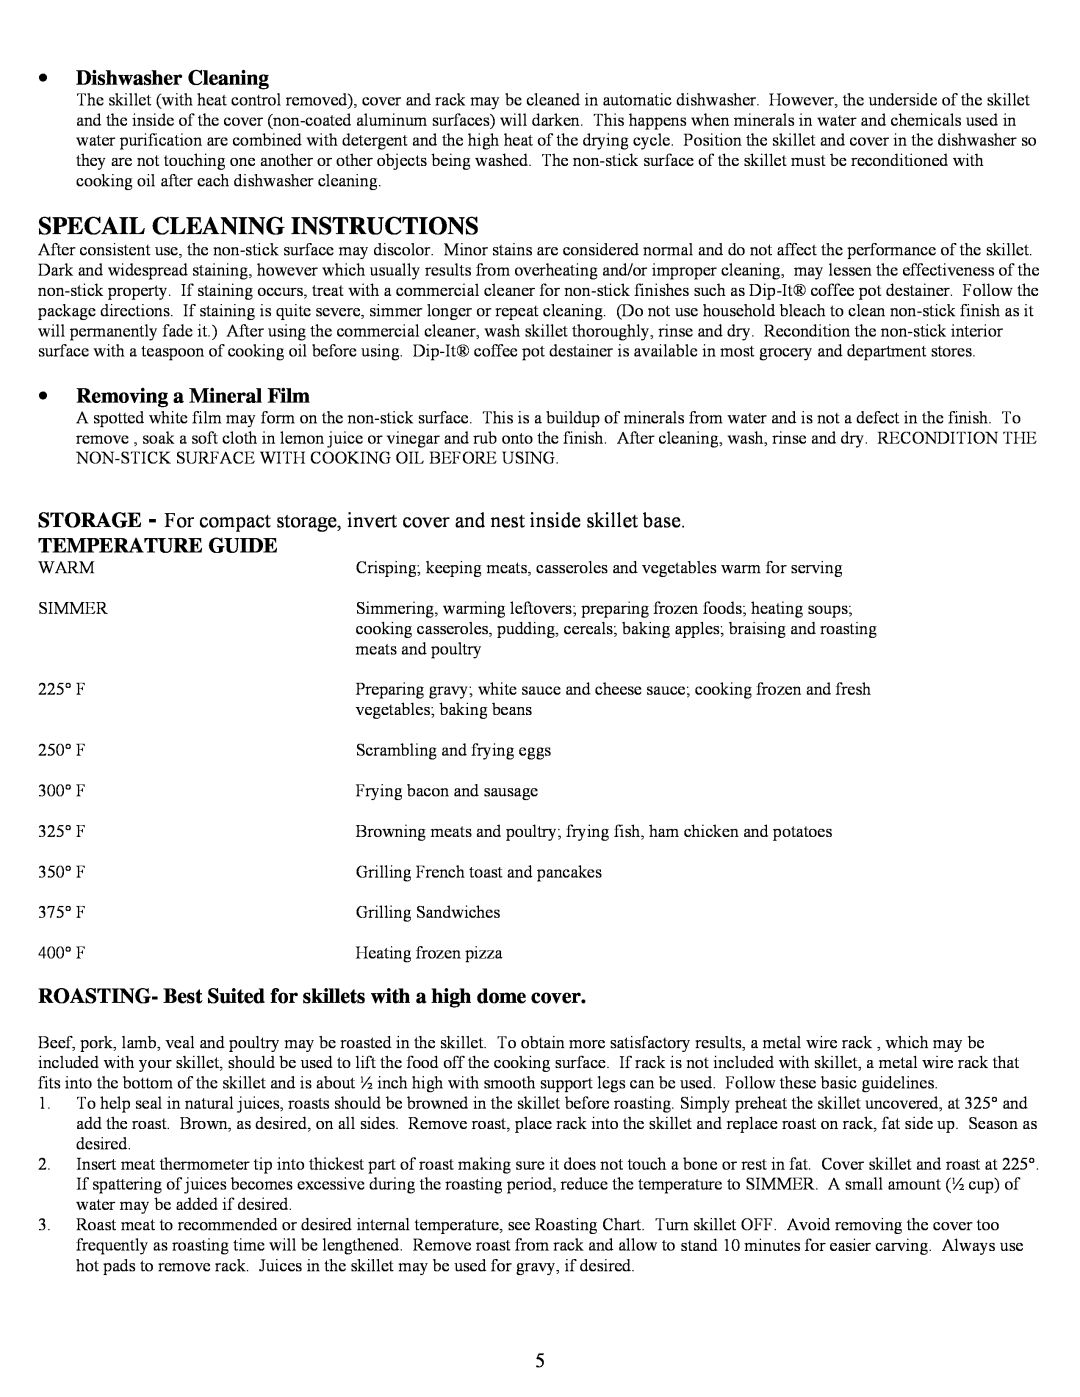 West Bend 72000 Specail Cleaning Instructions, Dishwasher Cleaning, Removing a Mineral Film, Temperature Guide 